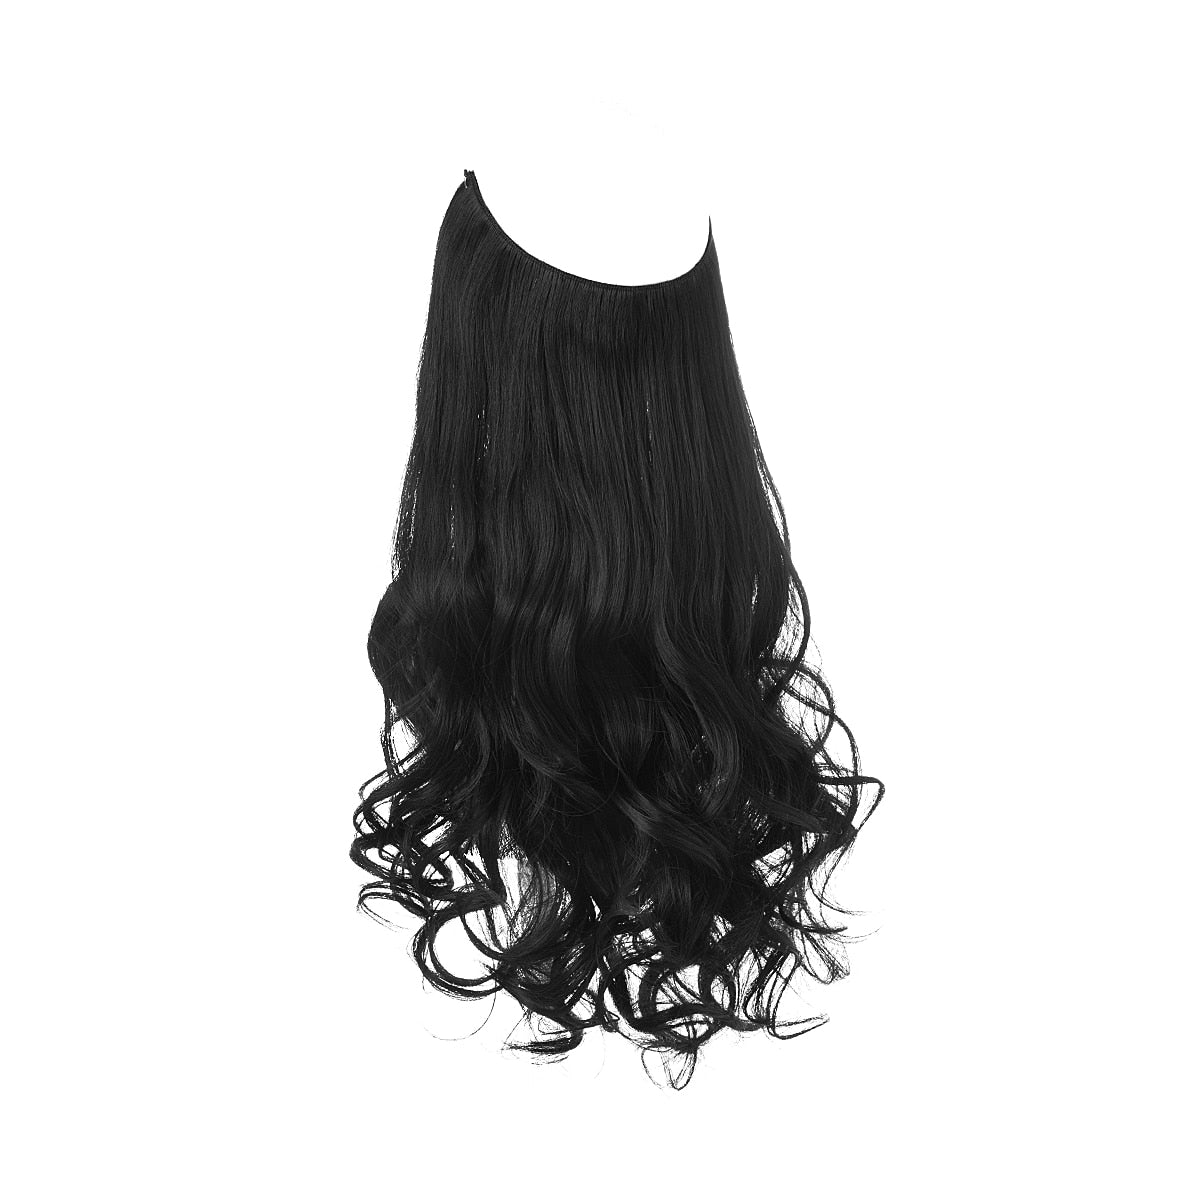 TEEK - Invisible Synth No Clip No Comb Wave Hair Extensions | Dark Varieties HAIR theteekdotcom Jet Black 14inches 